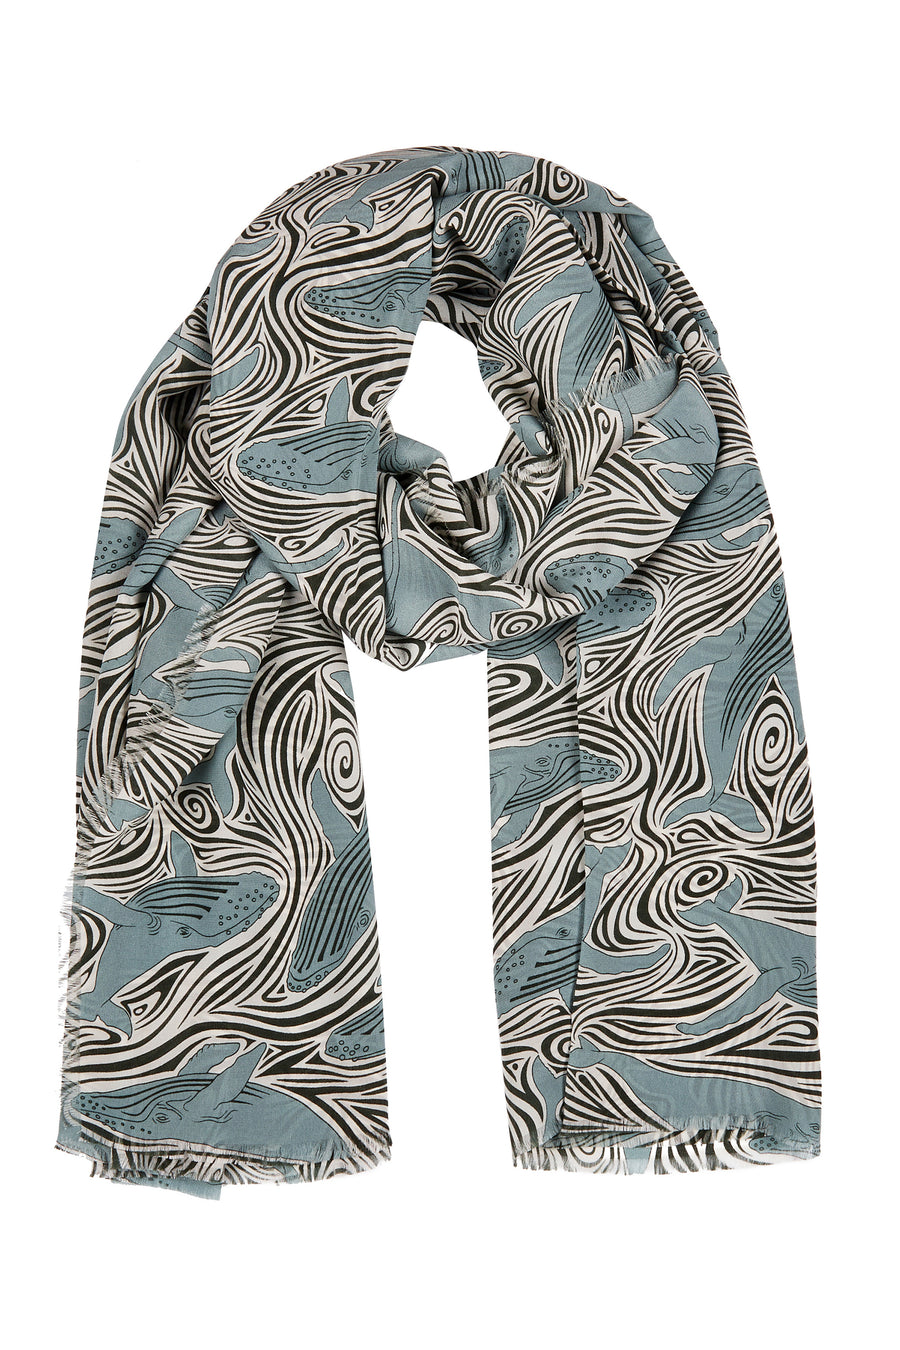 Silk scarf sarong in Whale monochrome design by Lotty B hand screen printed on crepe-de-chine. Mustique island lifestyle.